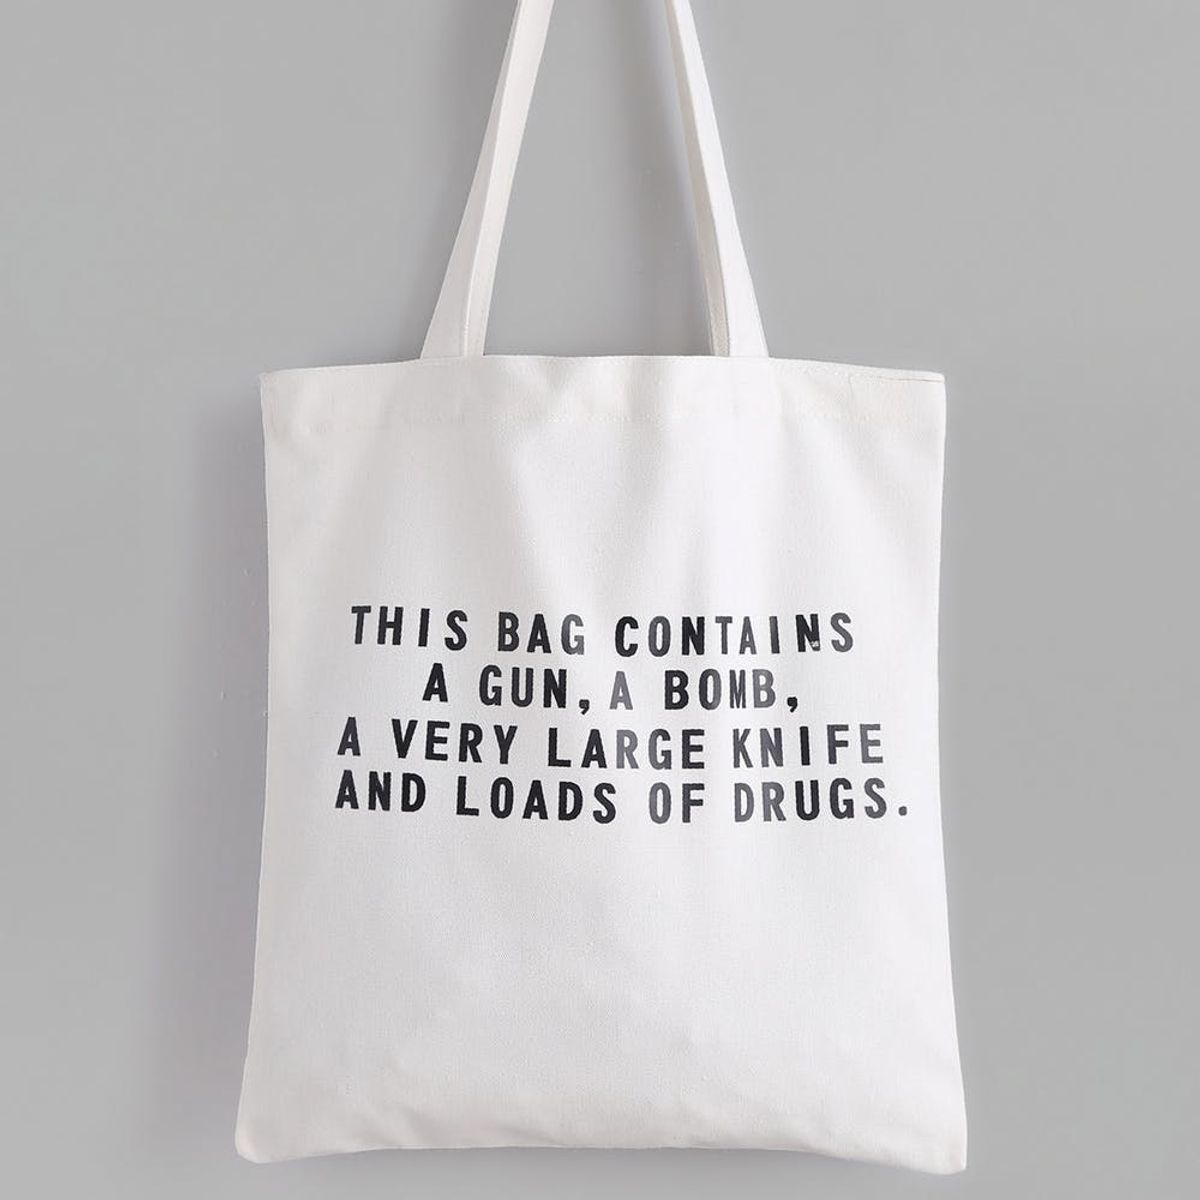 Romwe’s Tote Bag Is Under Fire for Making Light of Terrorism